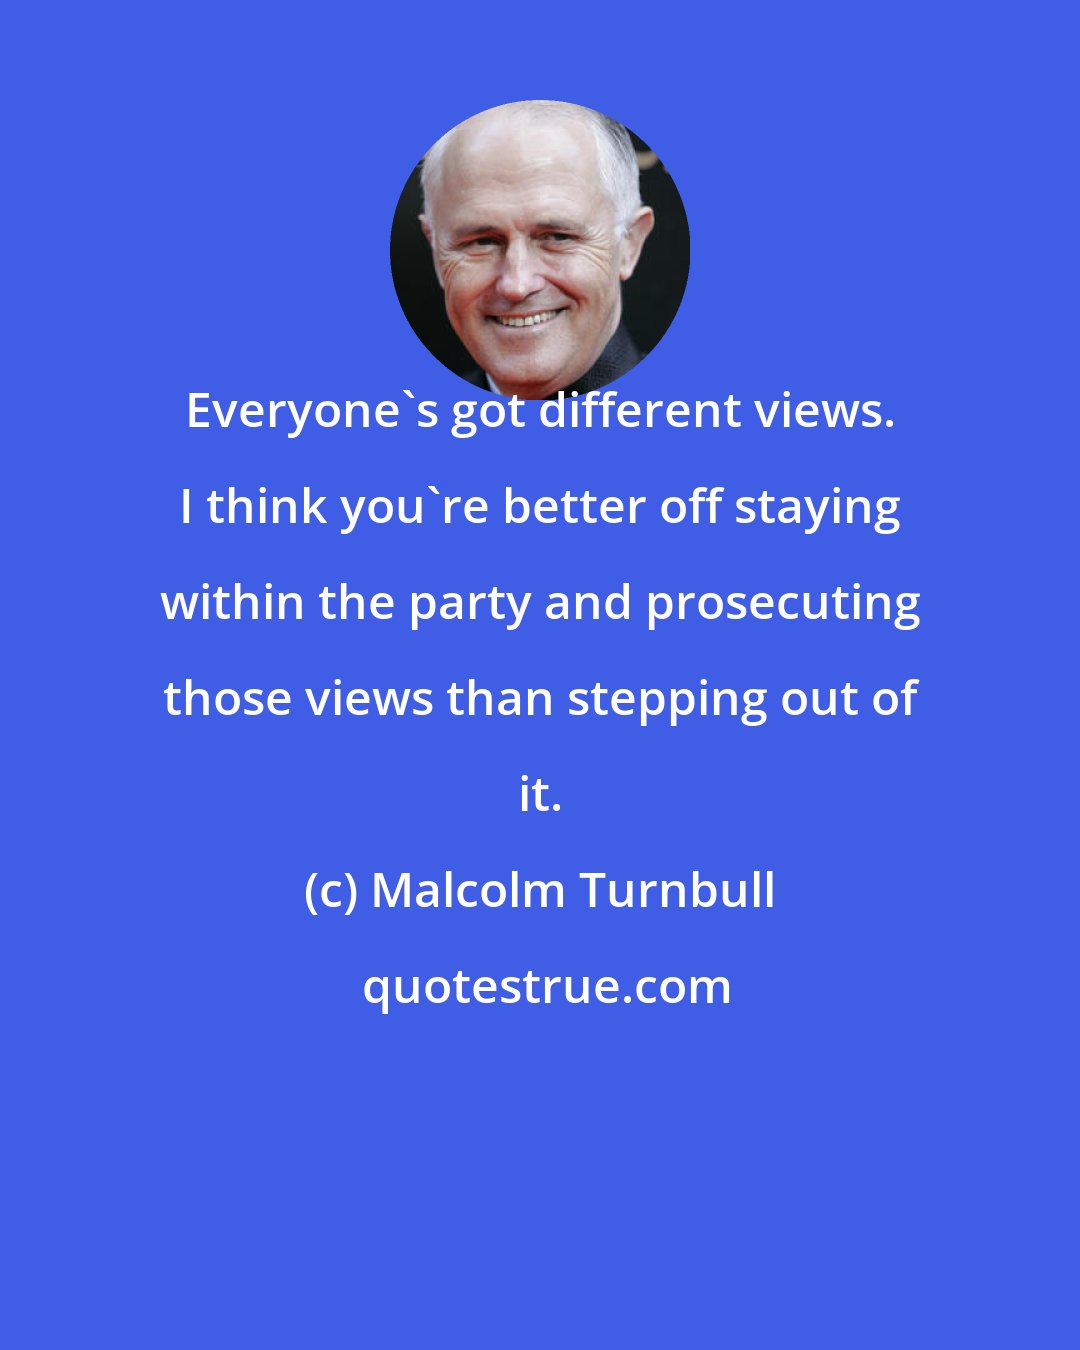 Malcolm Turnbull: Everyone's got different views. I think you're better off staying within the party and prosecuting those views than stepping out of it.